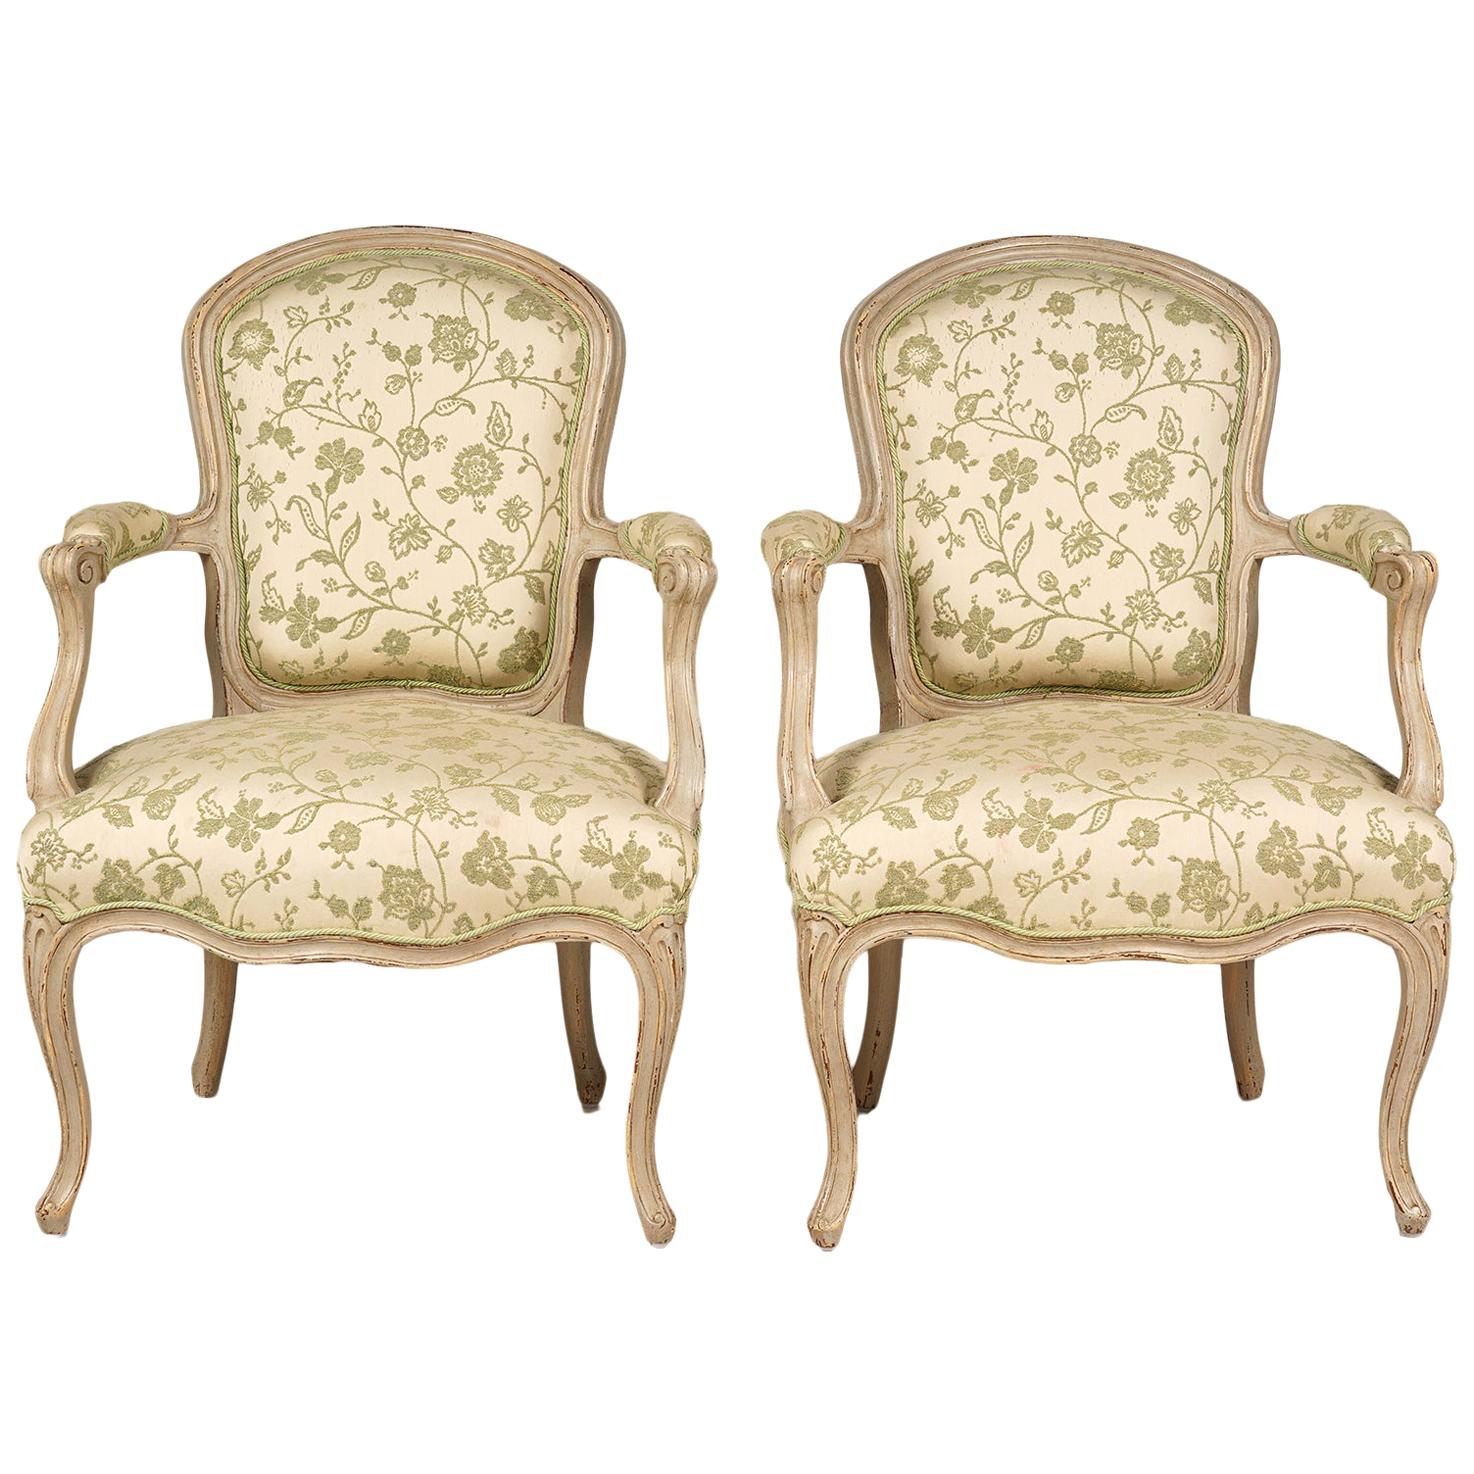 Pair of French Louis XV Style Carved and Painted Upholstered Armchairs